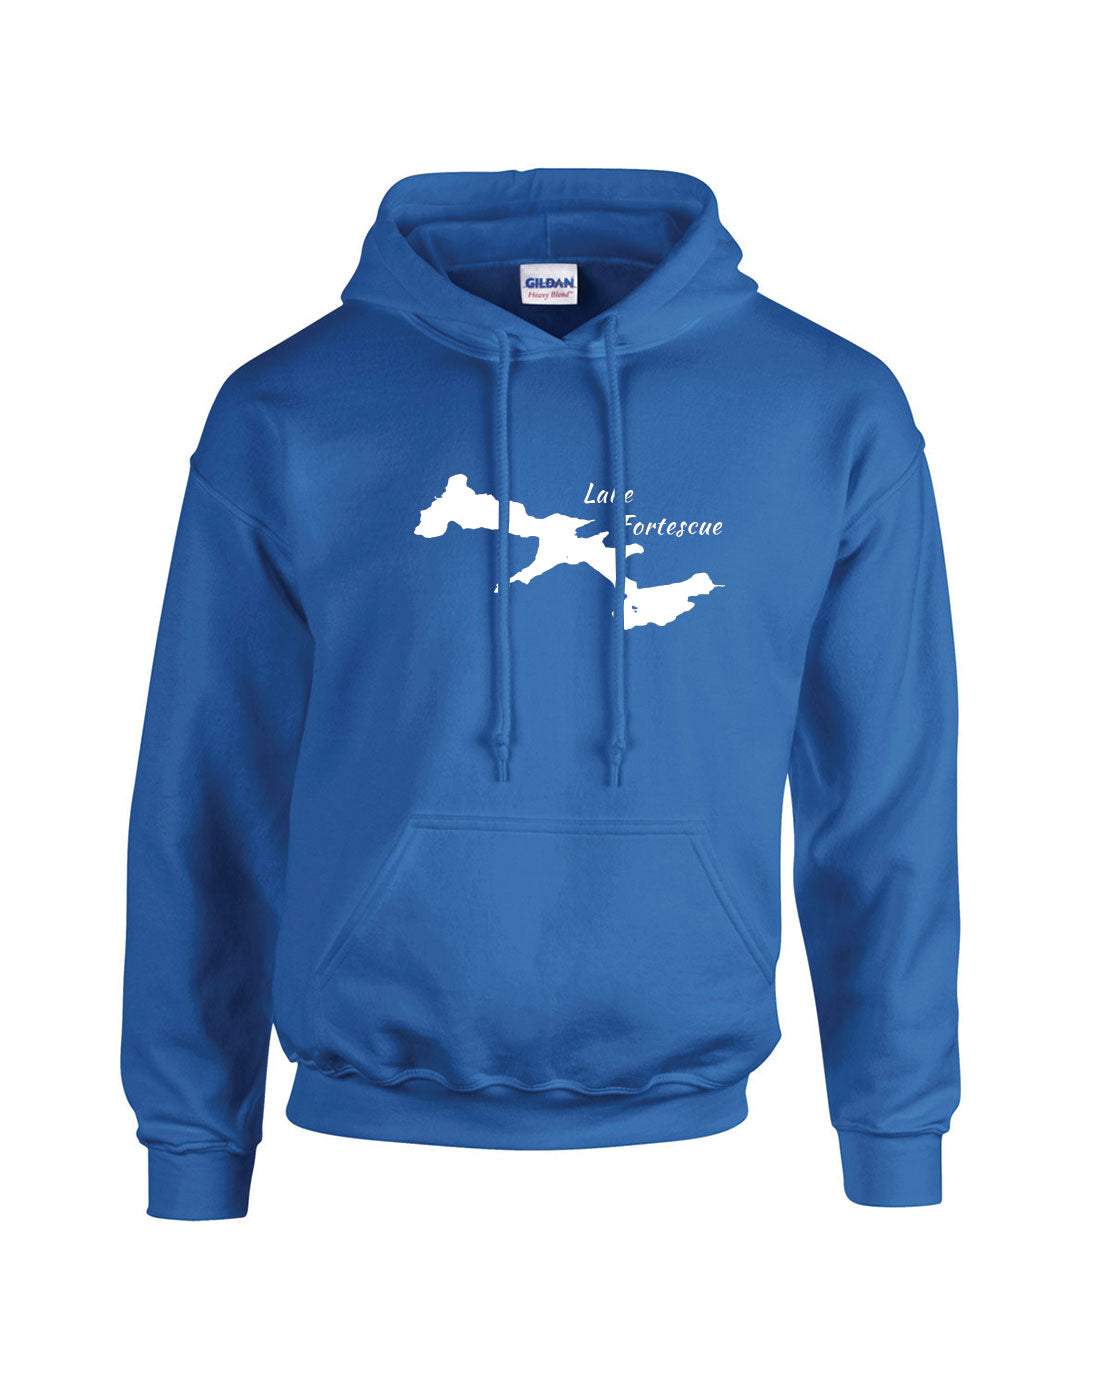 Lake Fortescue Hoodie